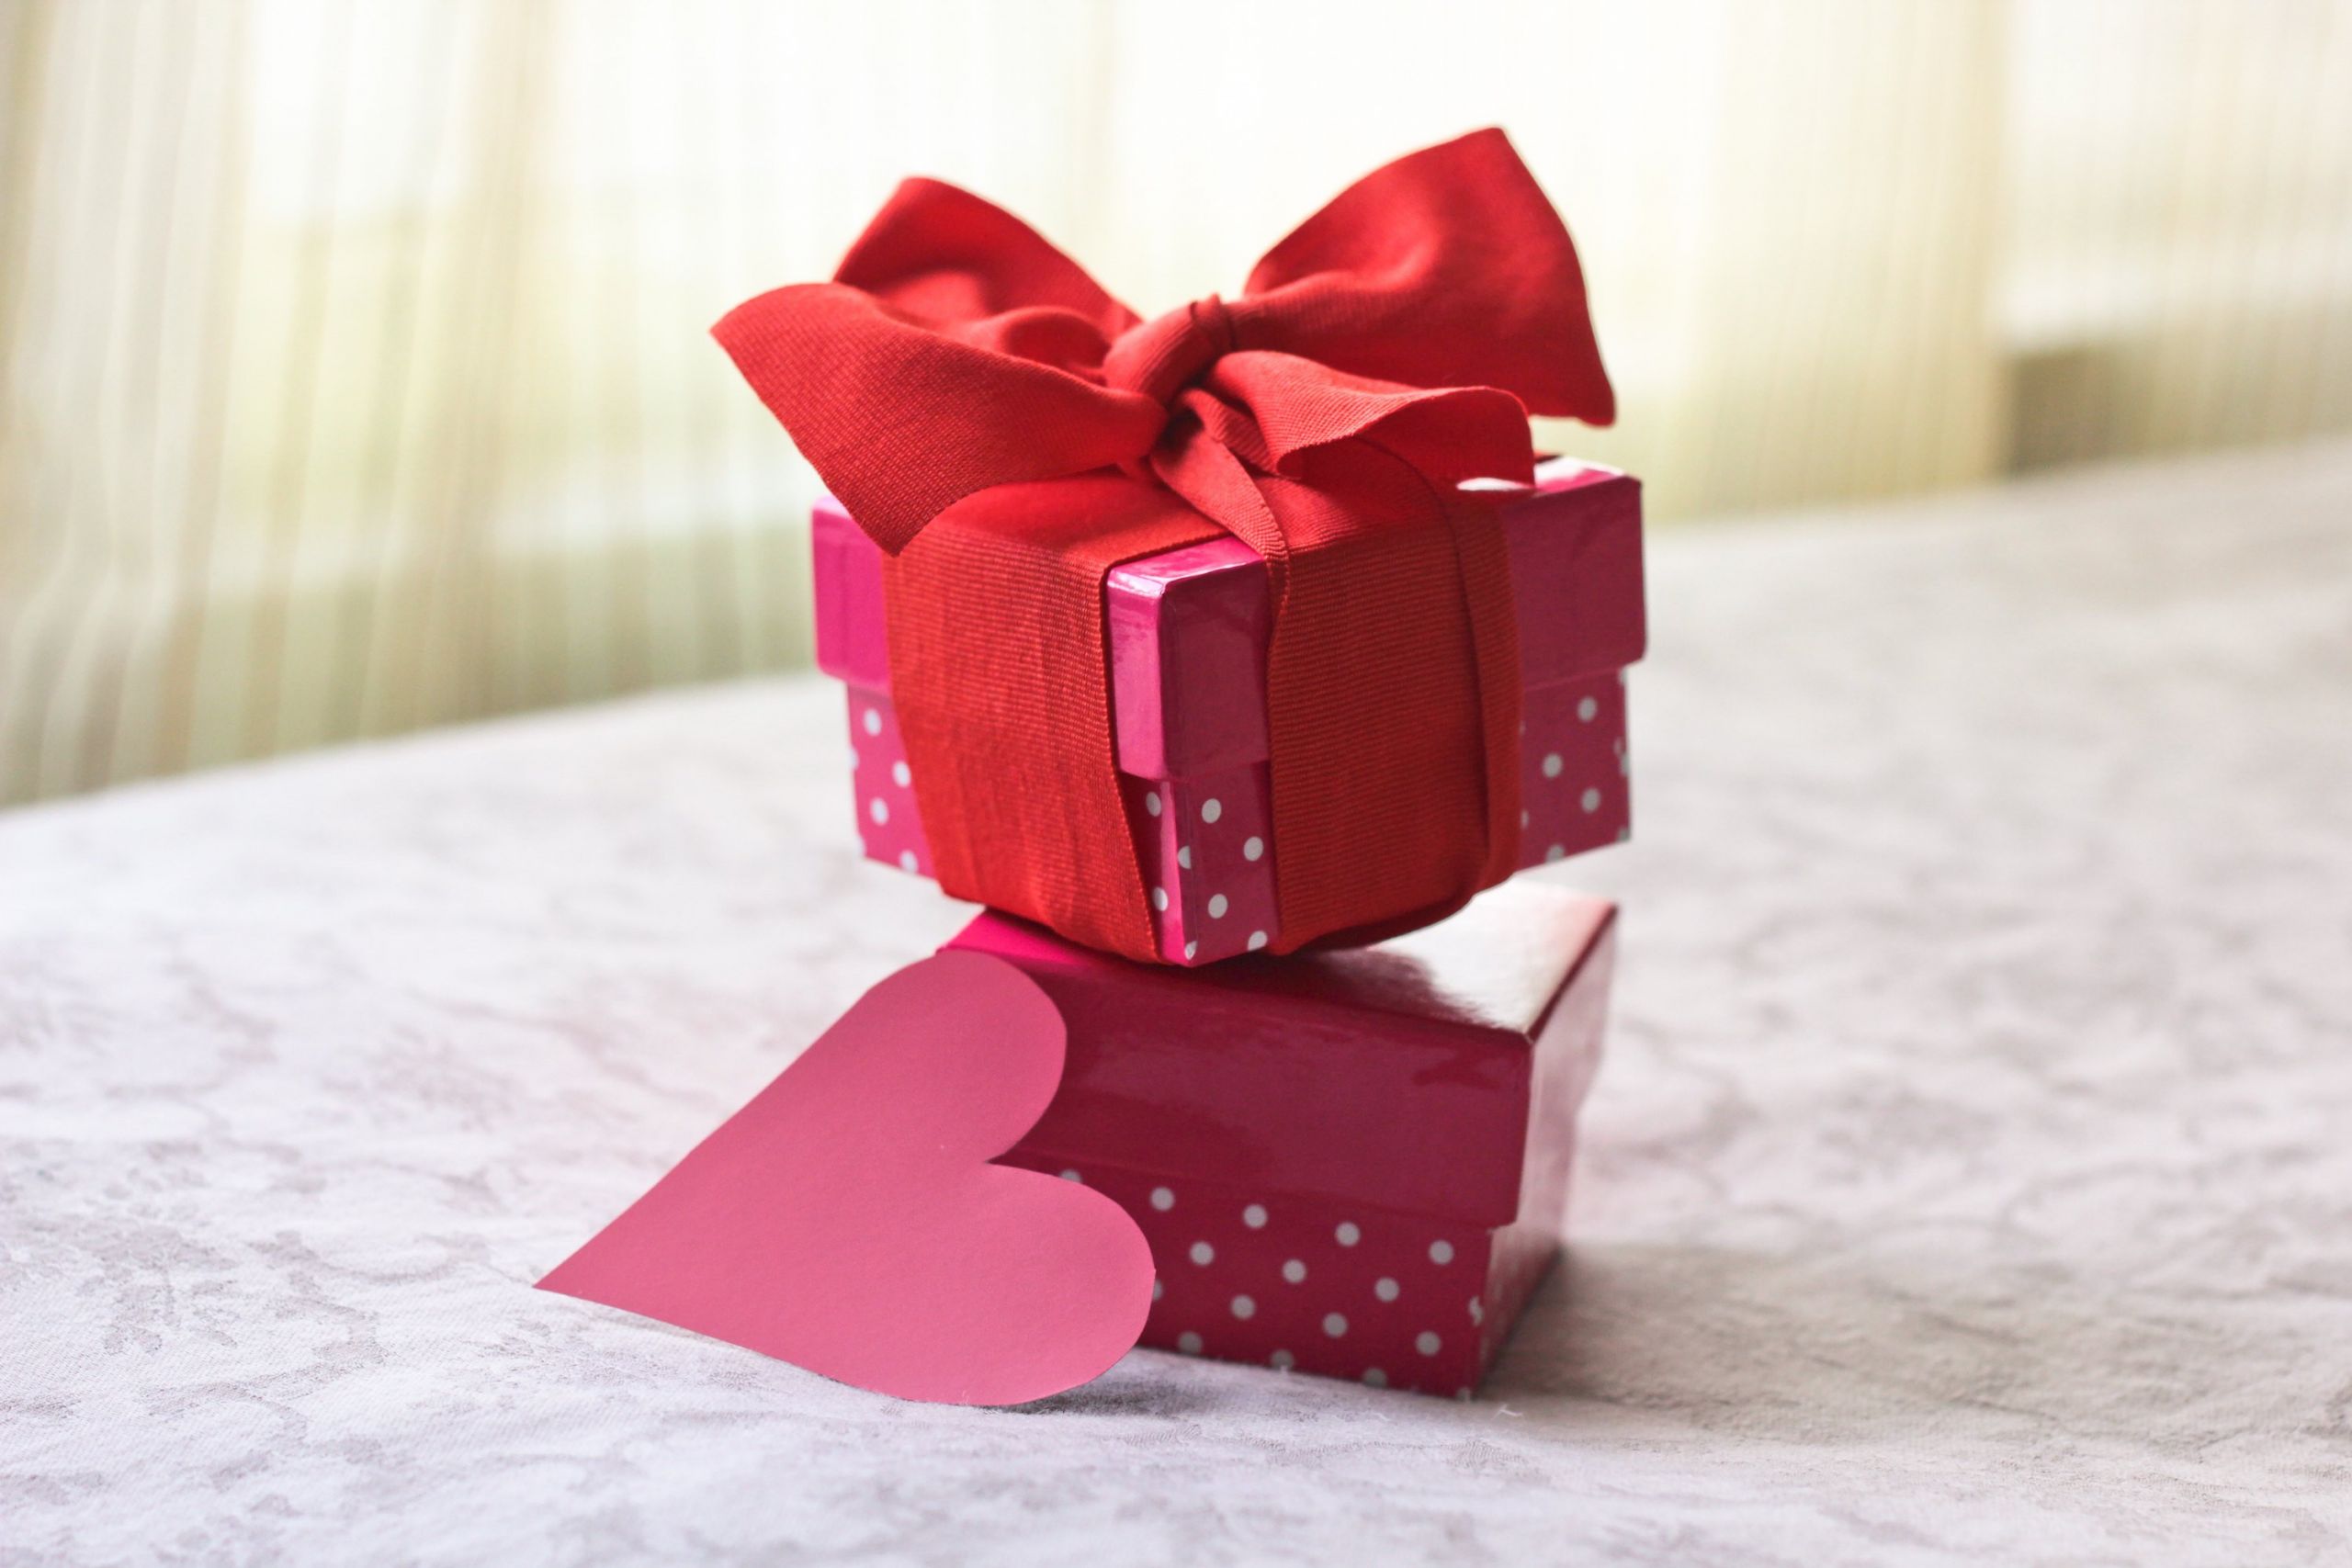 Romantic Birthday Gifts For Him
 Romantic Homemade Gifts for a Boyfriend on His Birthday